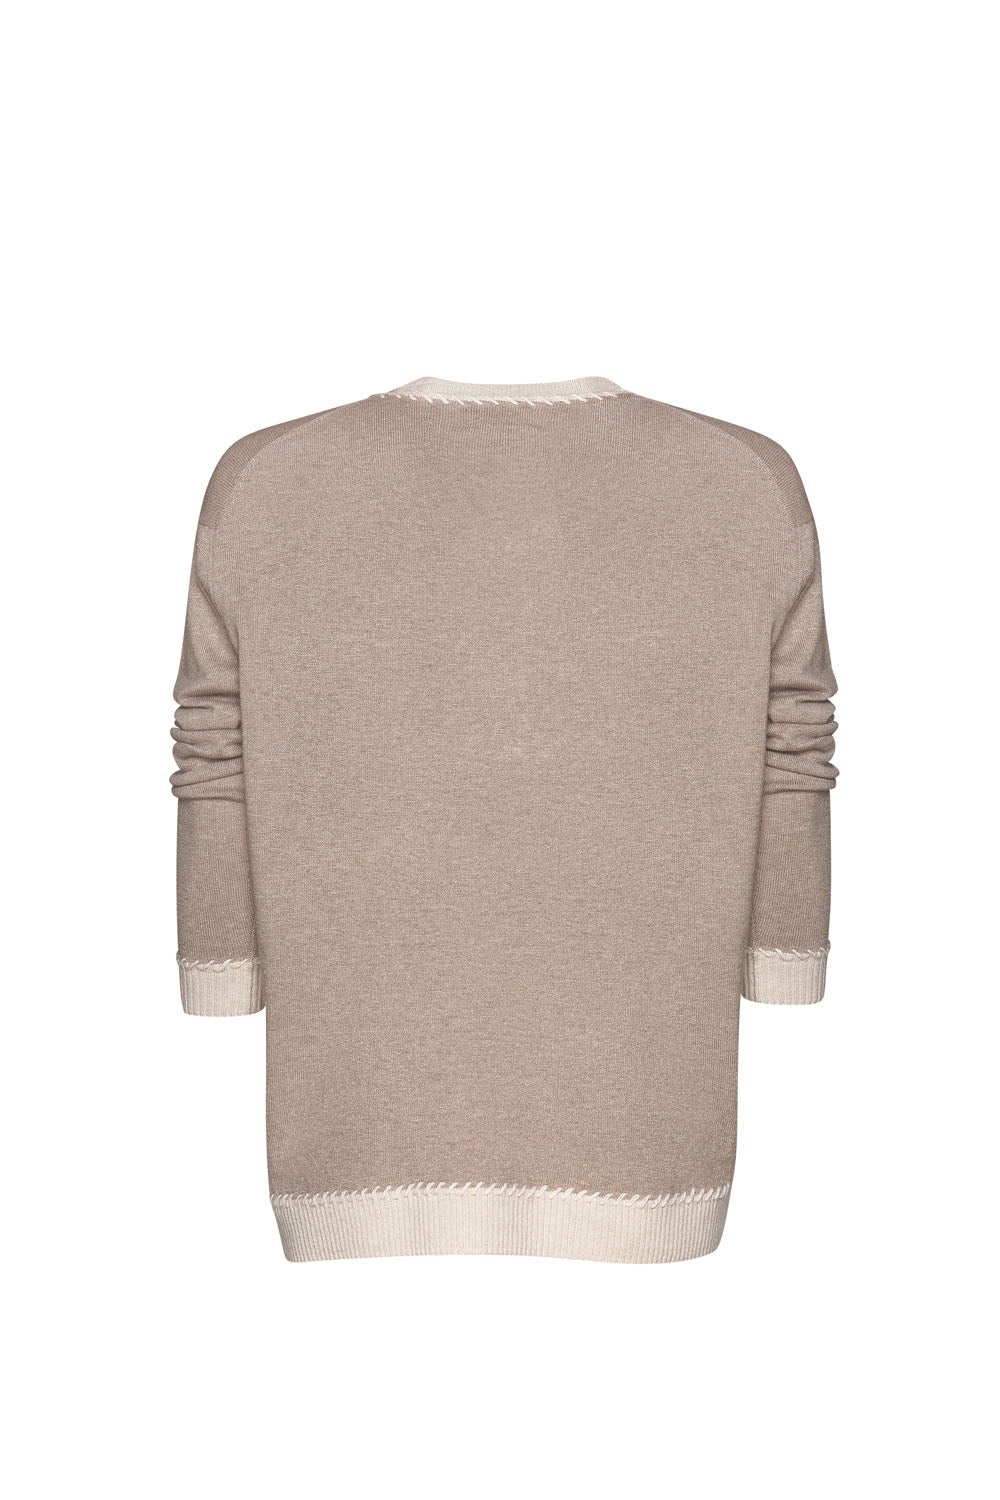 Madly Sweetly Whipped Up Sweater MSK153